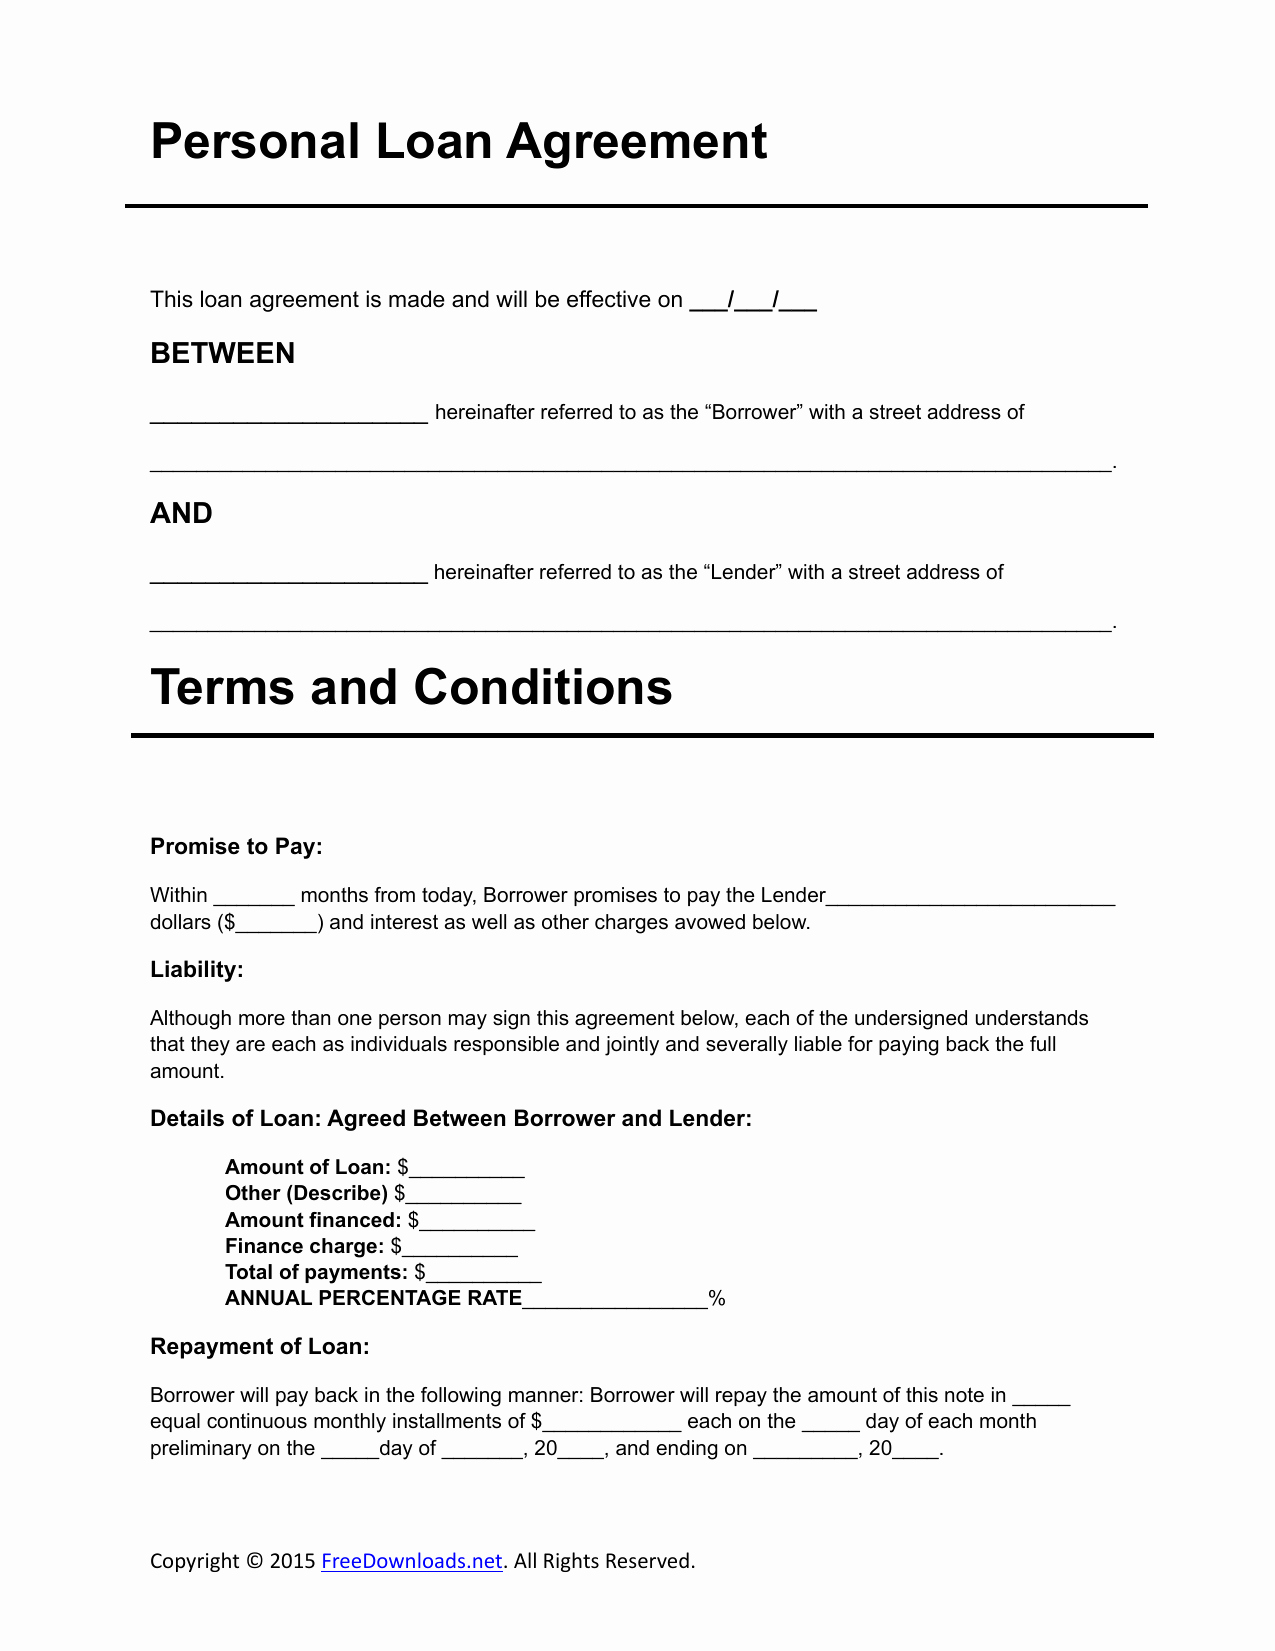 Free Loan Document Template New Download Personal Loan Agreement Template Pdf